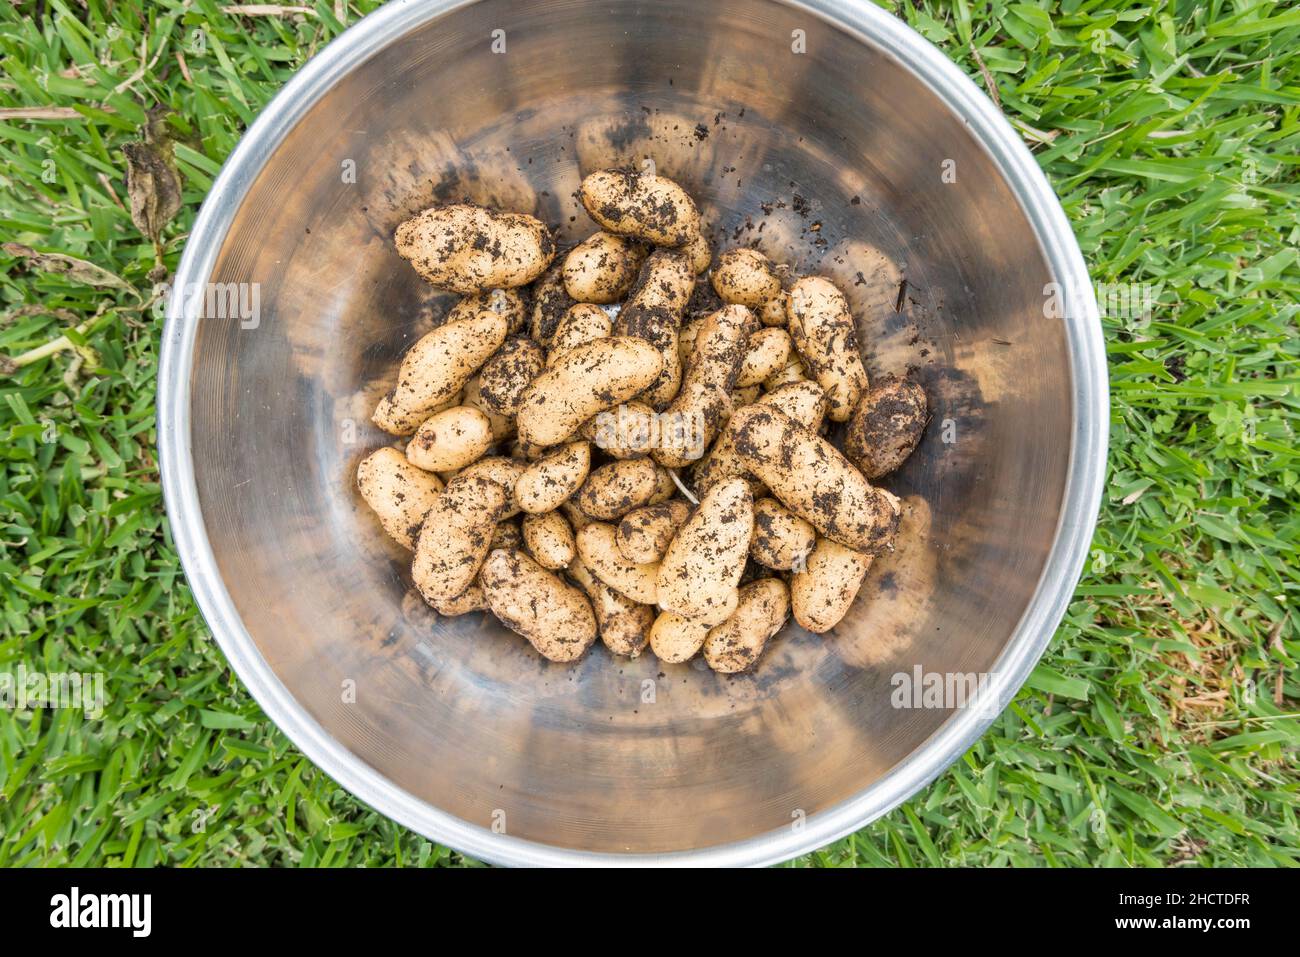 A stainless steel bowl holds freshly harvested and dug up Russian Banana fingerling potatoes (Solanum tuberosum) home grown in Sydney, Australia Stock Photo